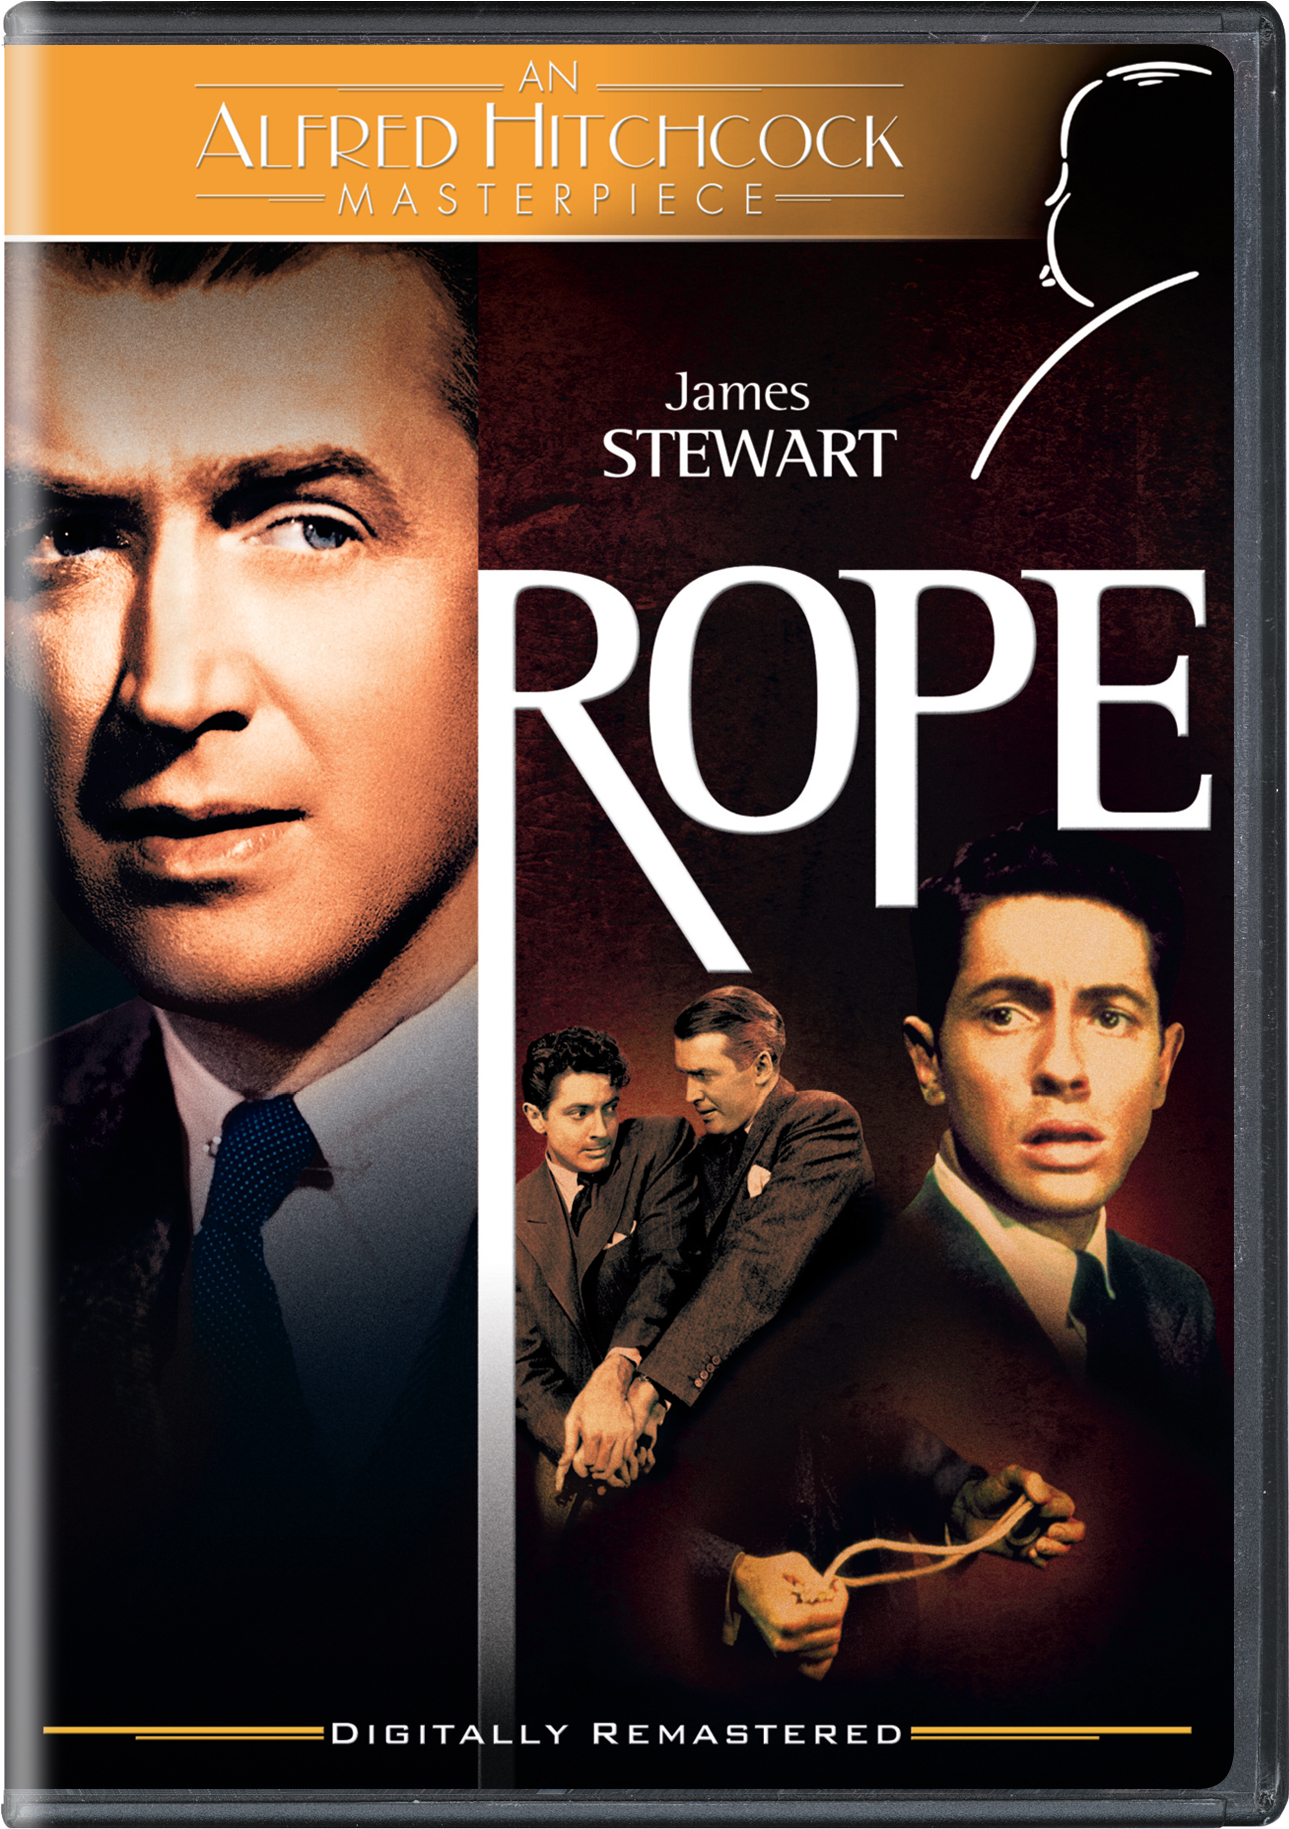 Rope - DVD [ 1948 ]  - Classic Movies On DVD - Movies On GRUV